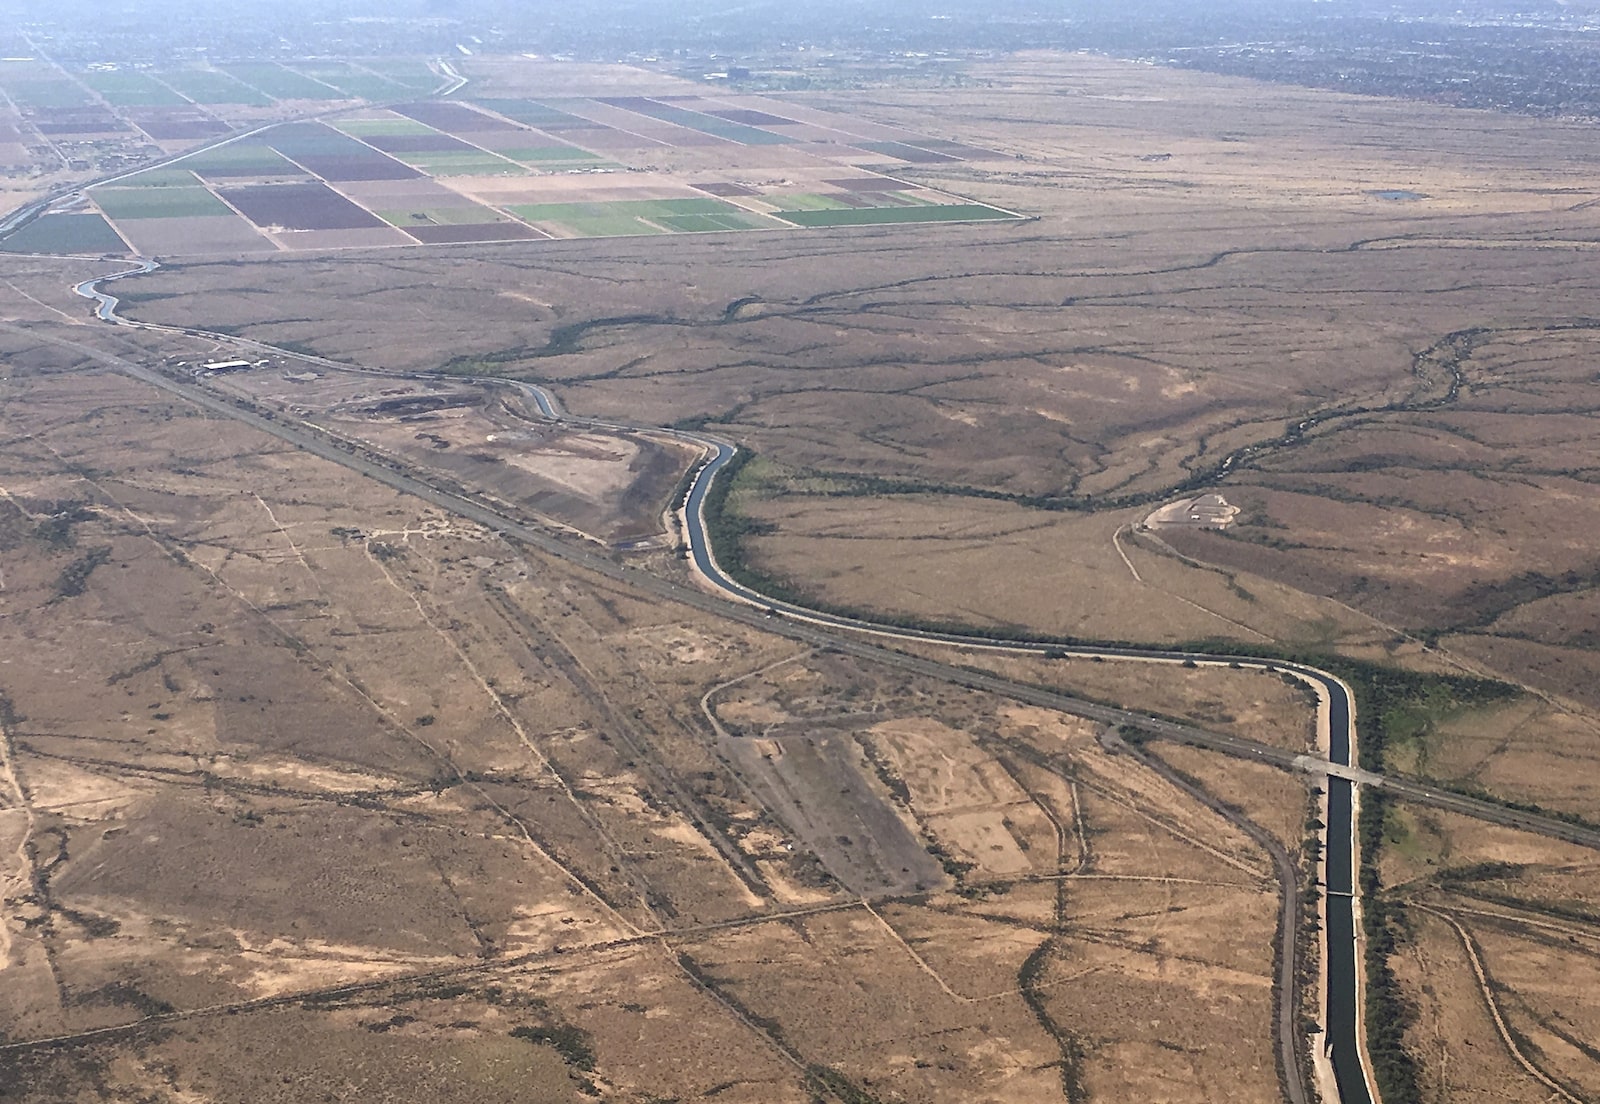 an aerial view of a blue canal winding through dry landcape